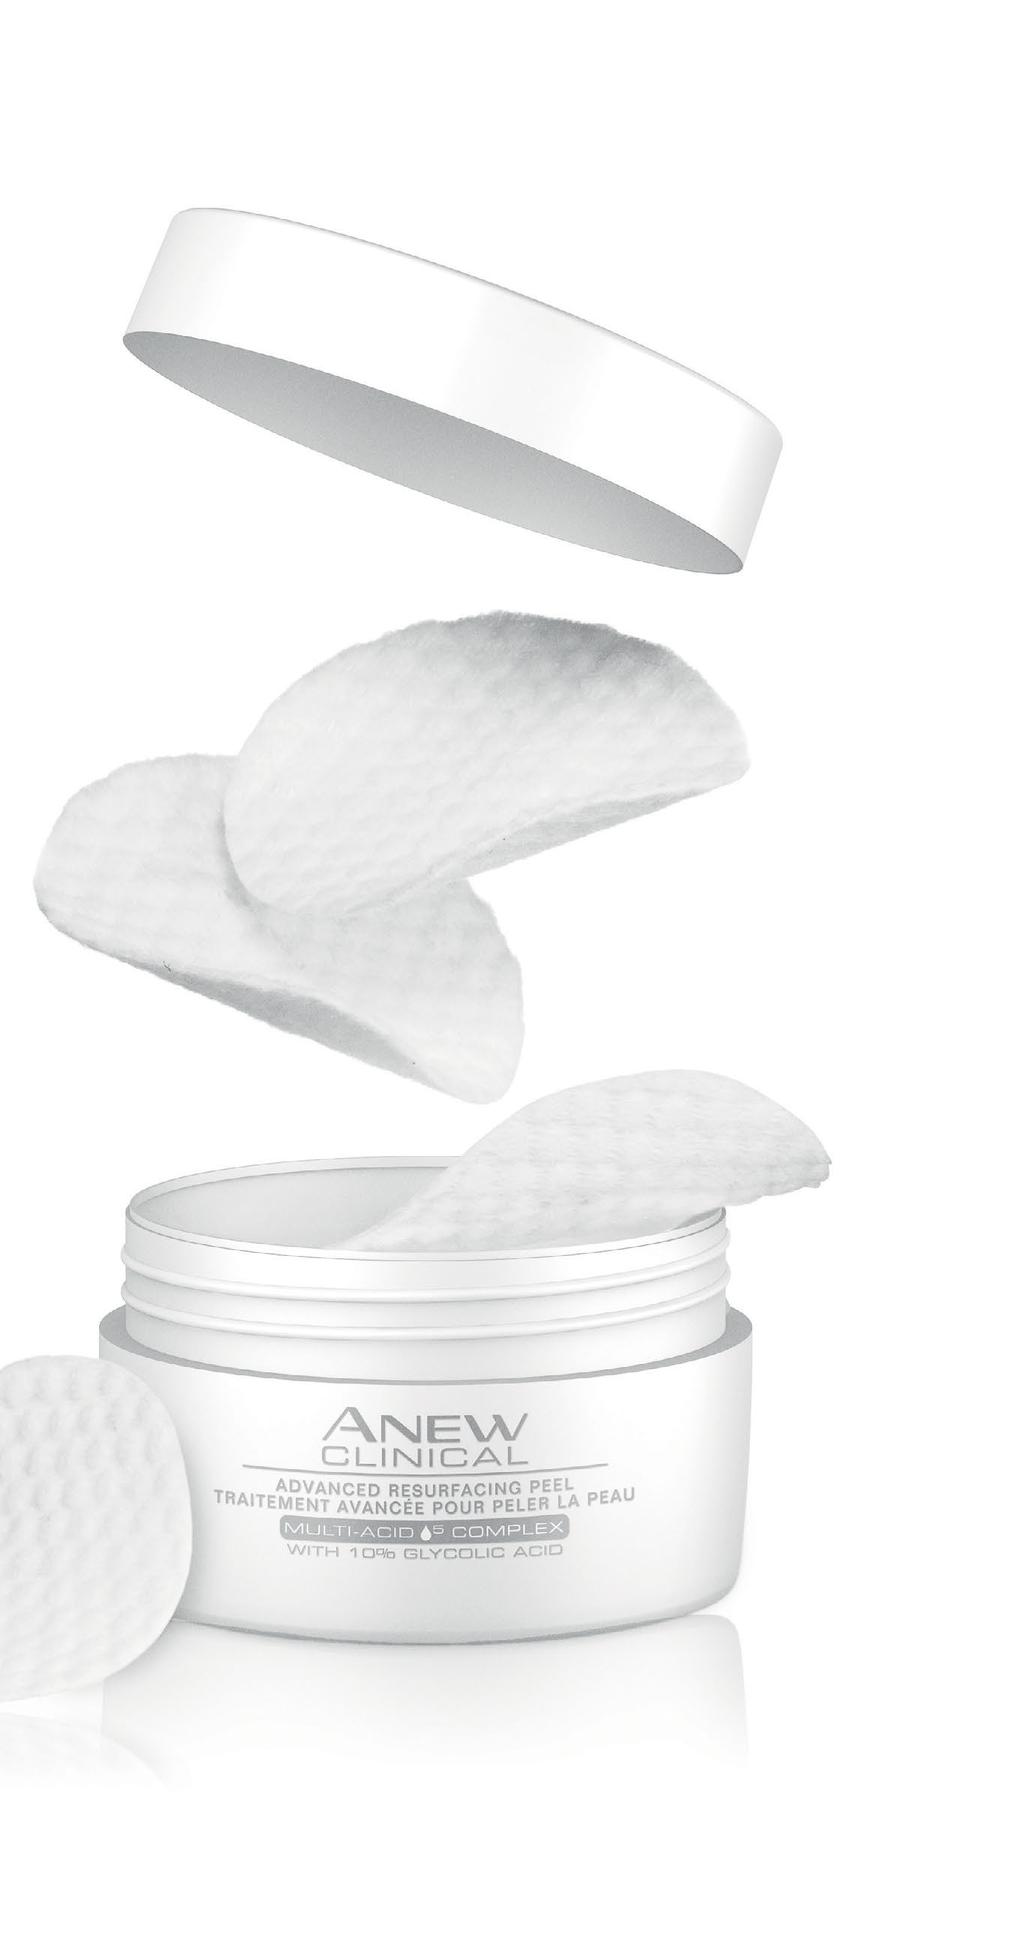 THE ANSWER: ANEW CLINICAL ADVANCED RESURFACING PEEL PADS WHAT does it do? Reveals smoother, brighter-looking skin in just one sweep!